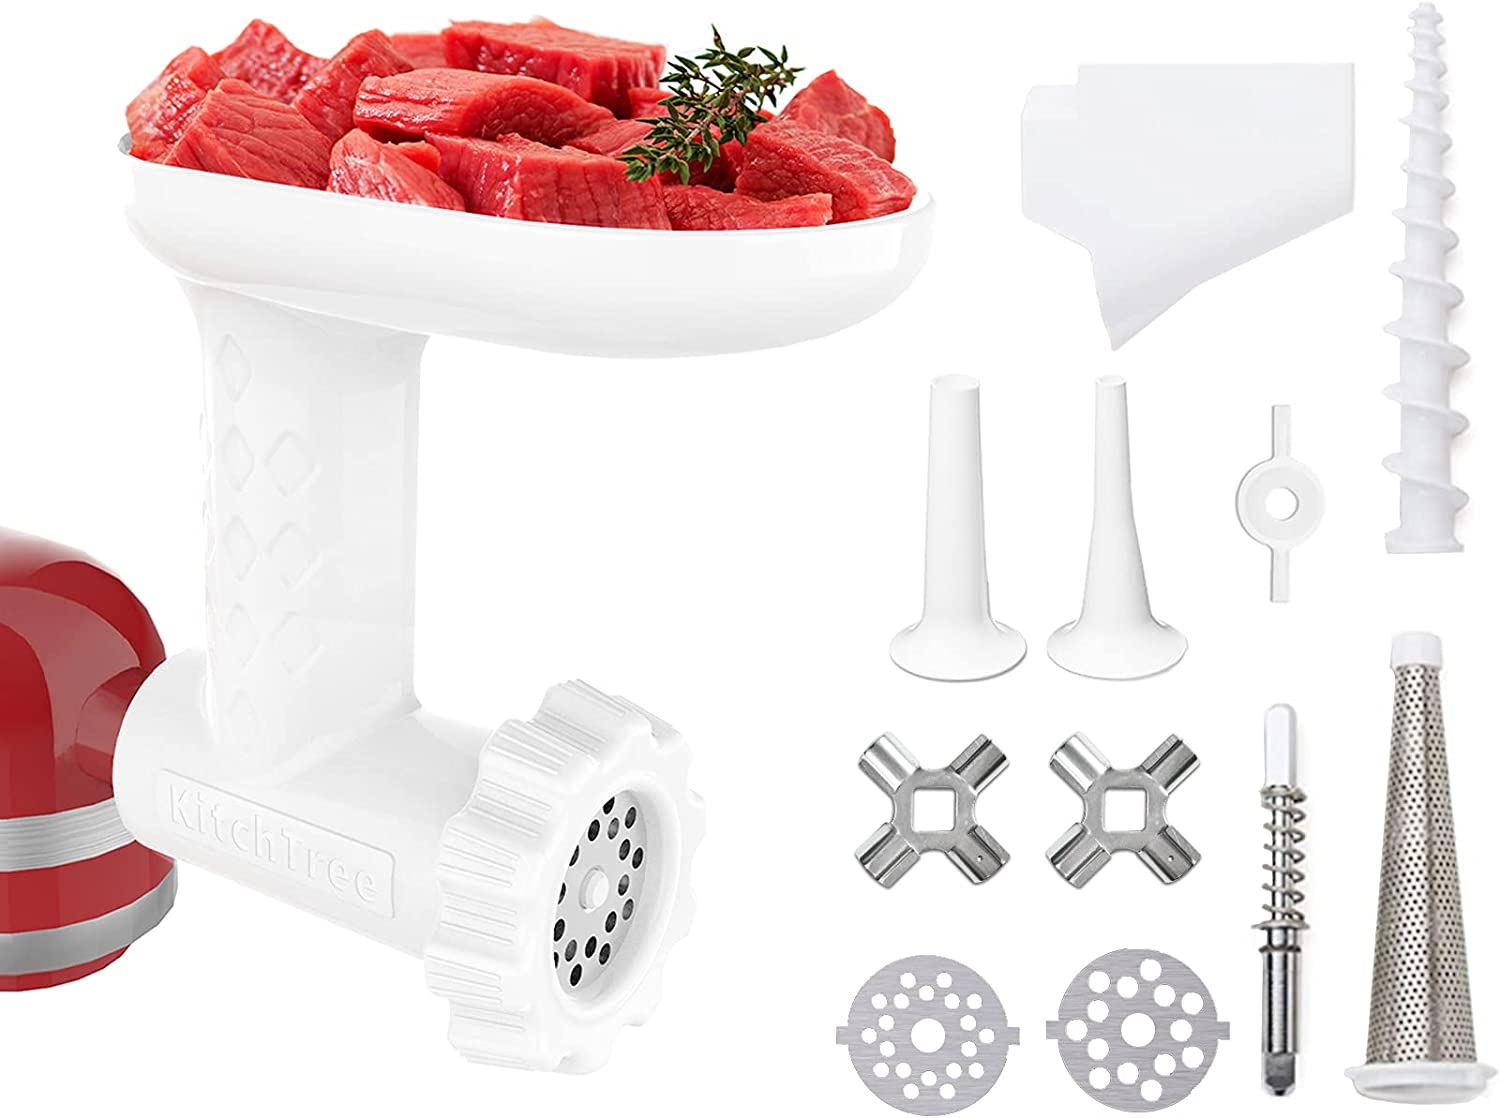 KITCHTREE Meat Grinder Attachment for KitchenAid Stand Mixers Includes Food Grinder Attachment and Sausage Stuffer Attachment